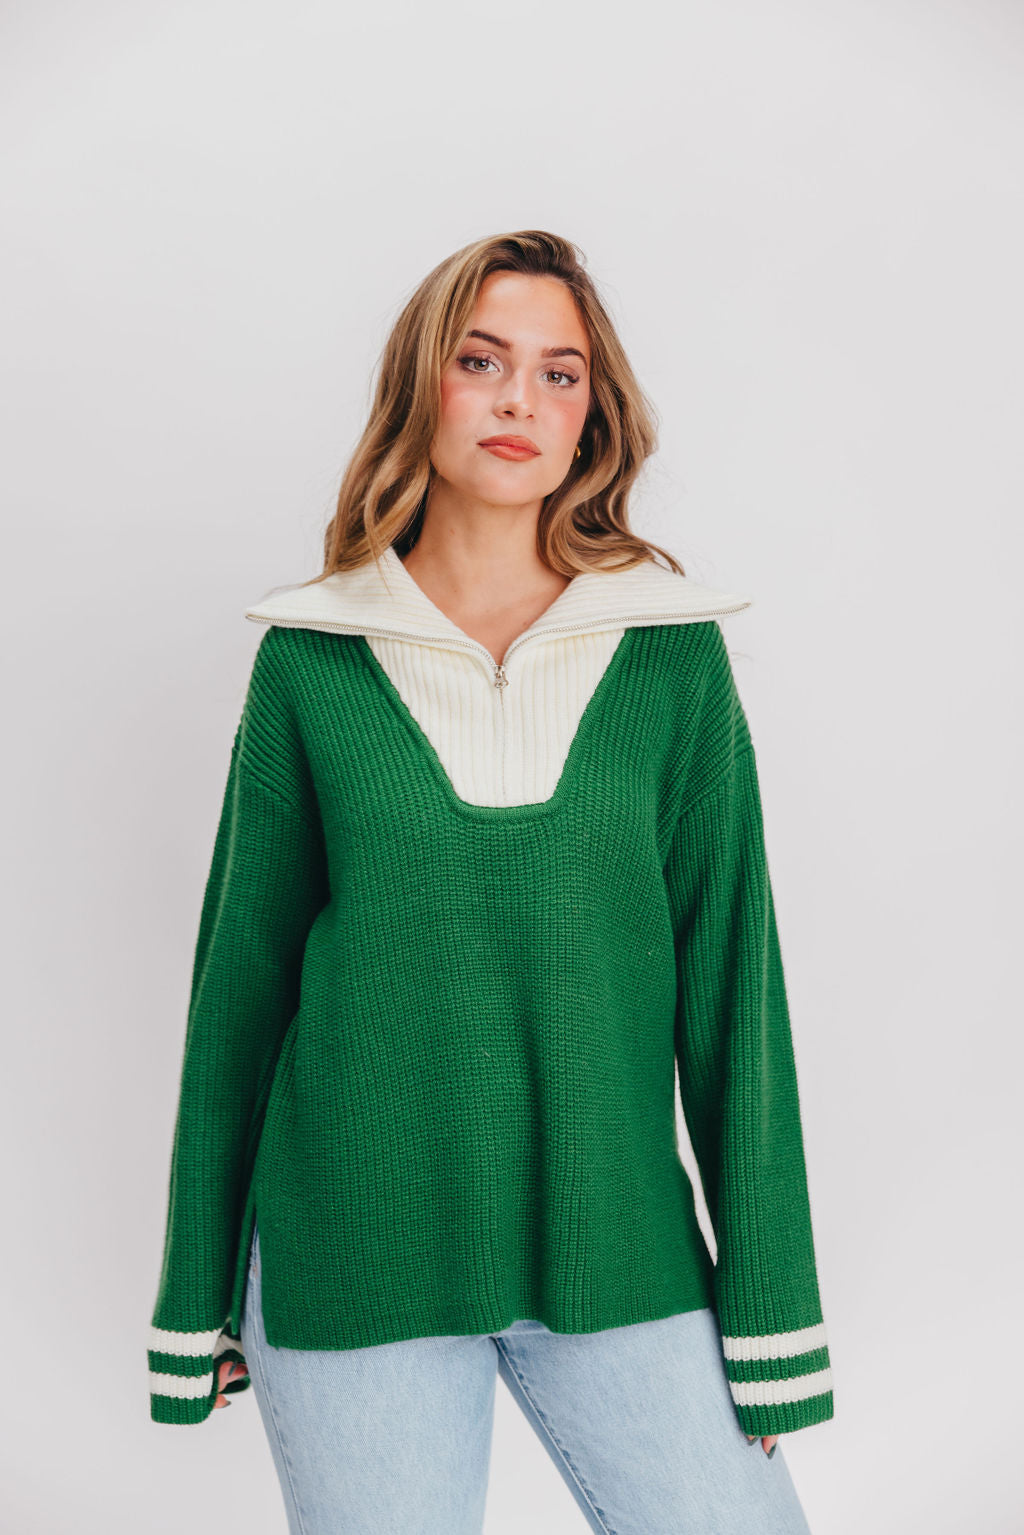 Old Money Pullover Sweater in Green/White Stripe